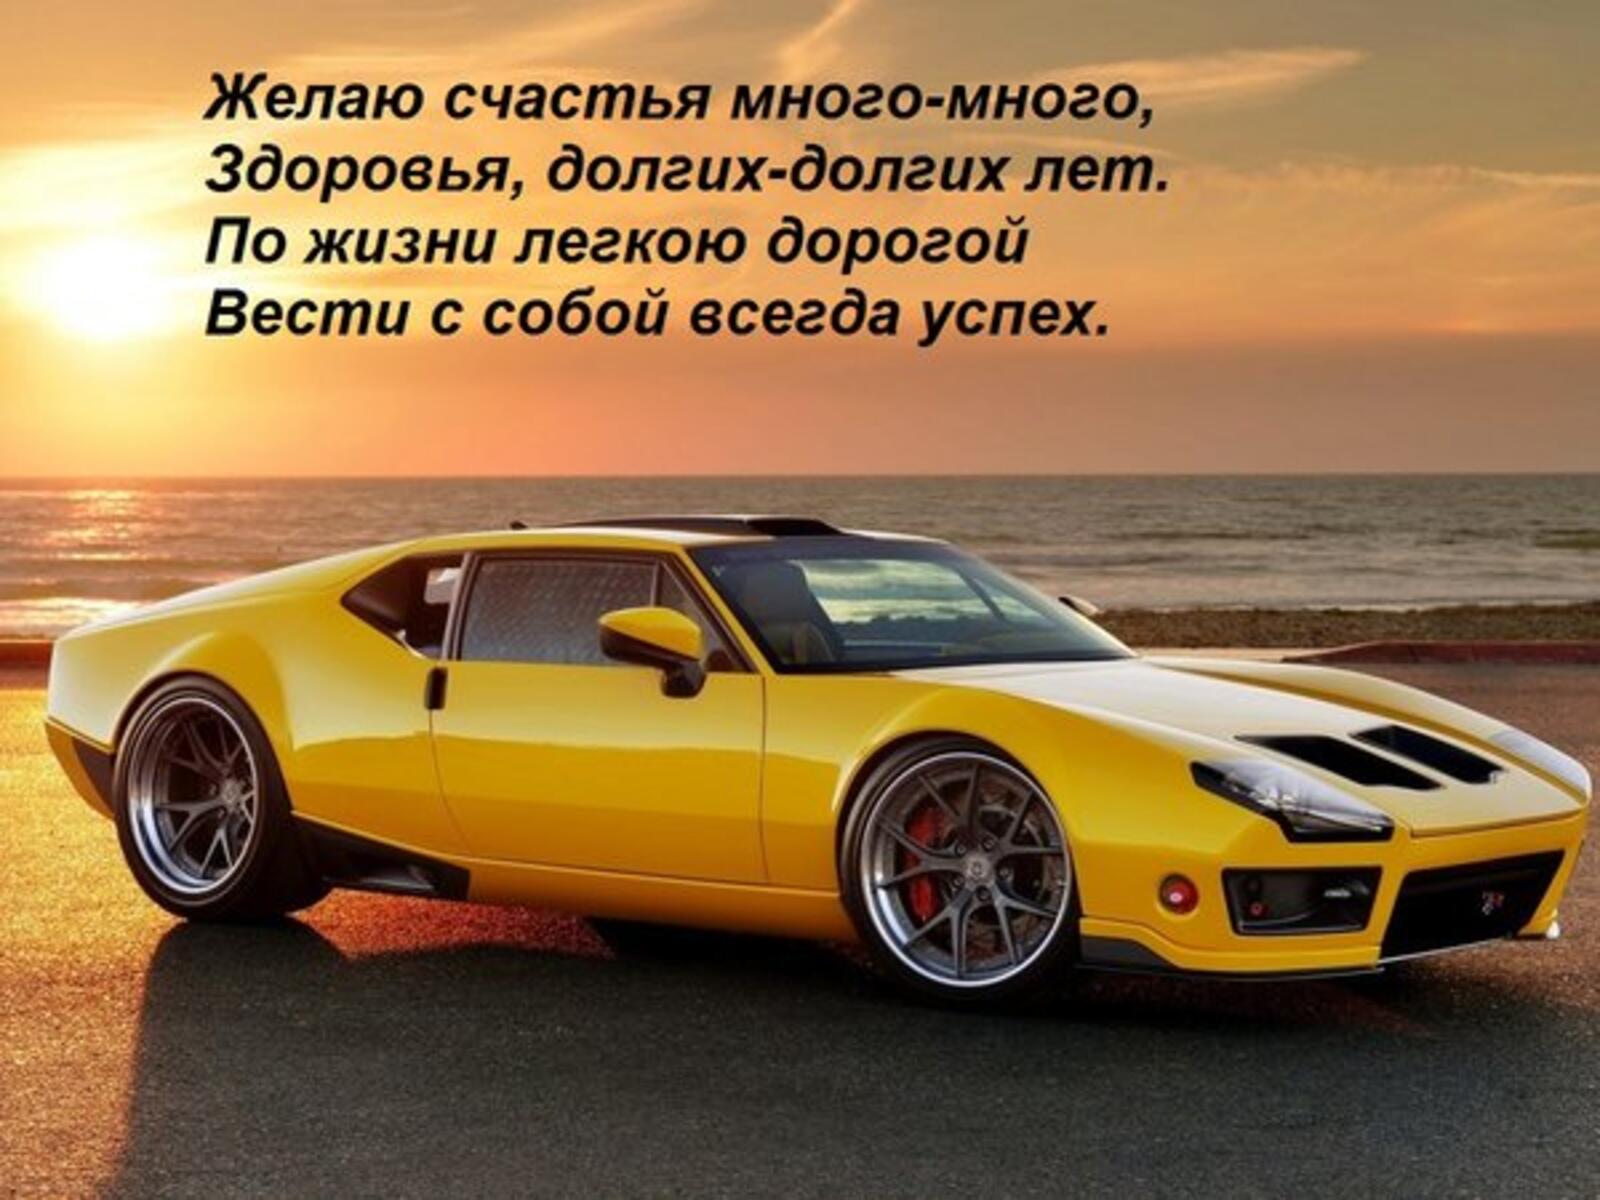 verse car sea we wish you a life without worries